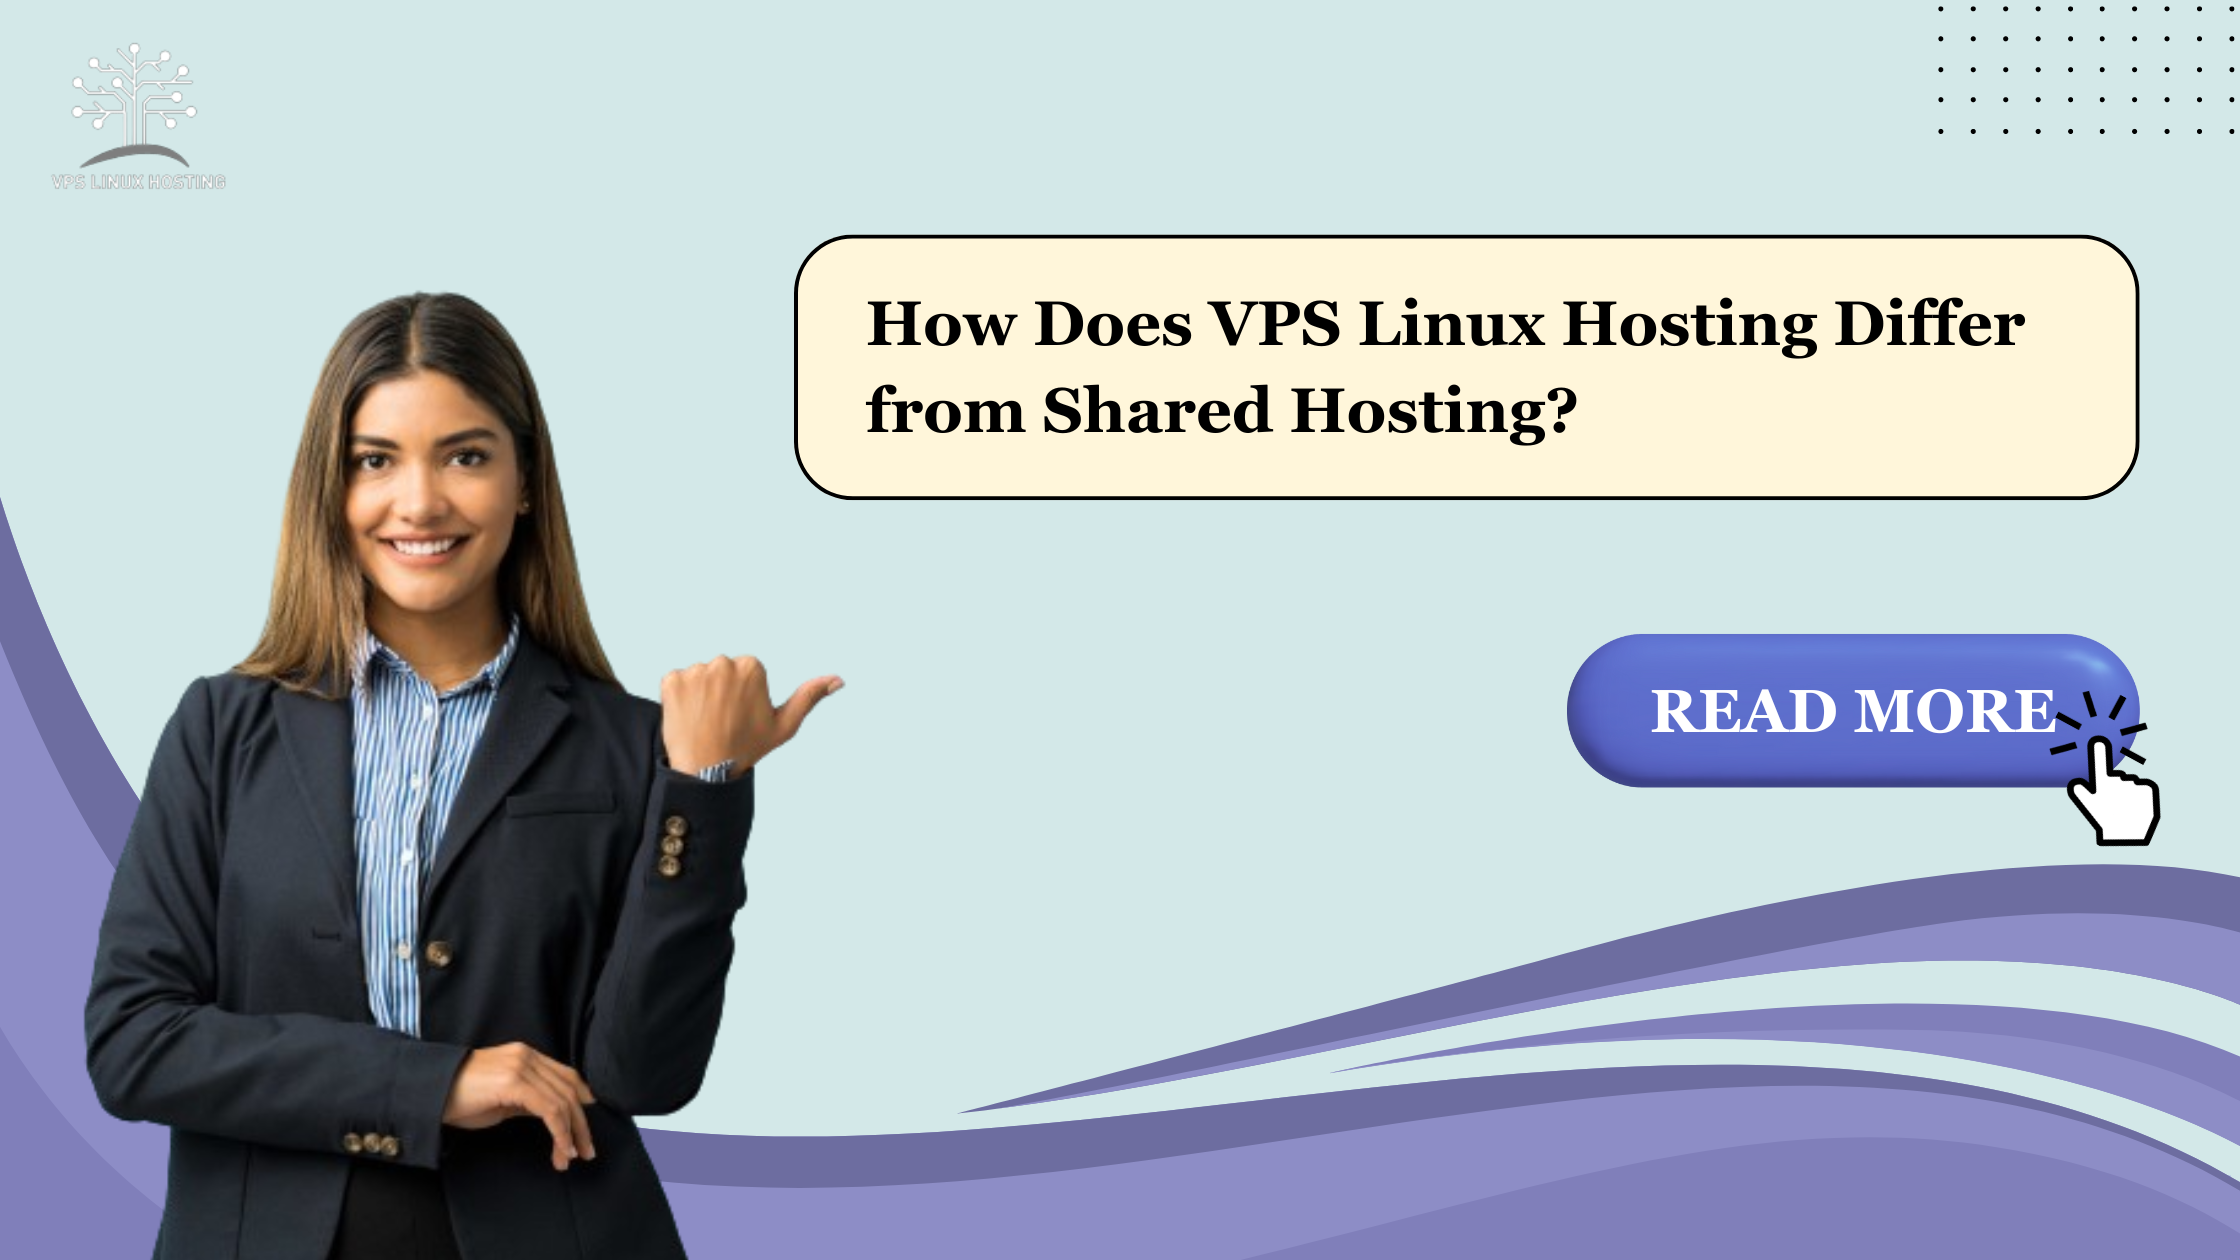 How Does VPS Linux Hosting Differ from Shared Hosting?